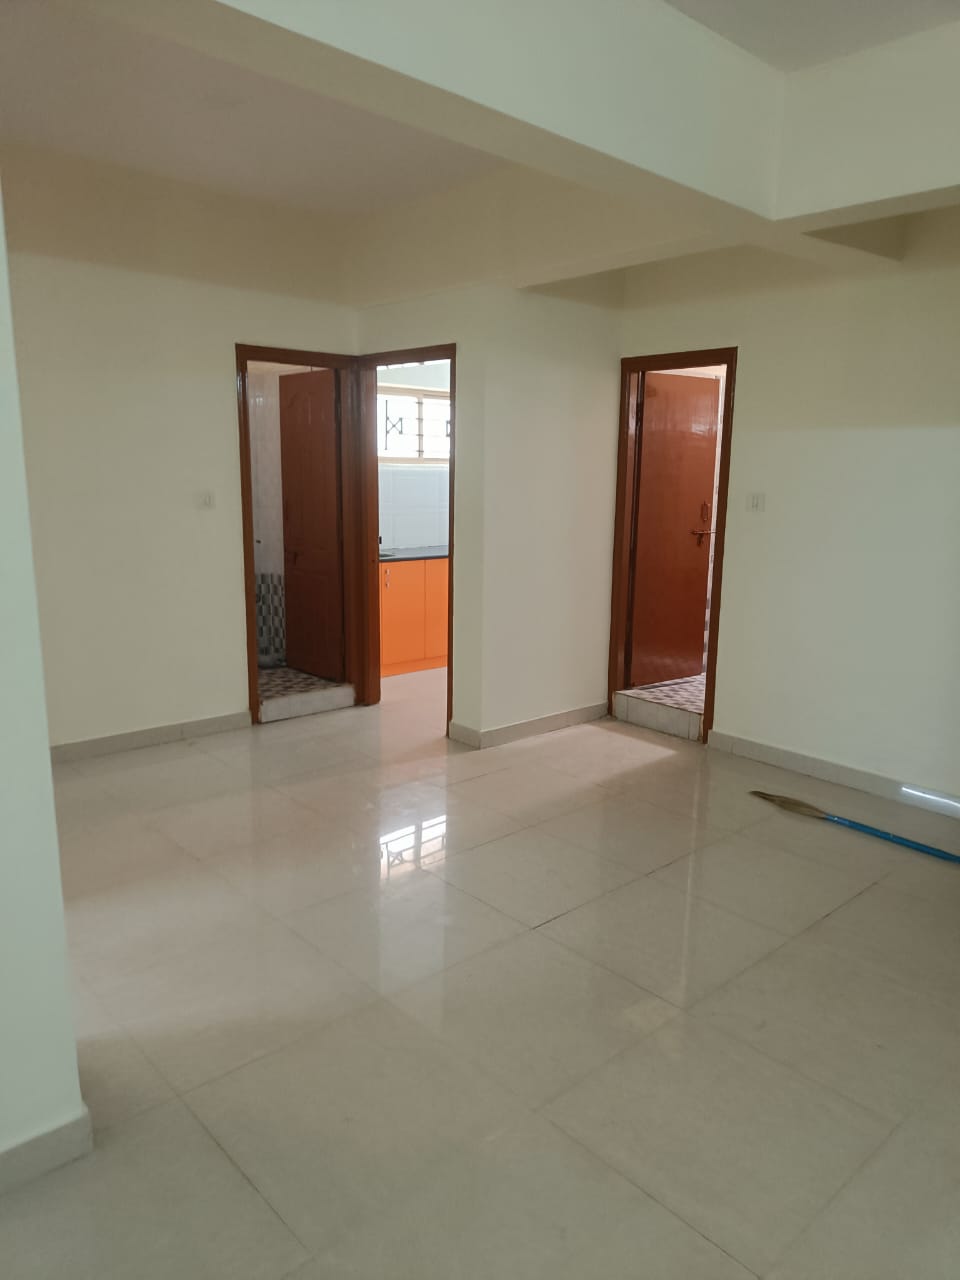 1 BHK Independent House for Lease Only at JAML2 - 4079 in Indira Nagar